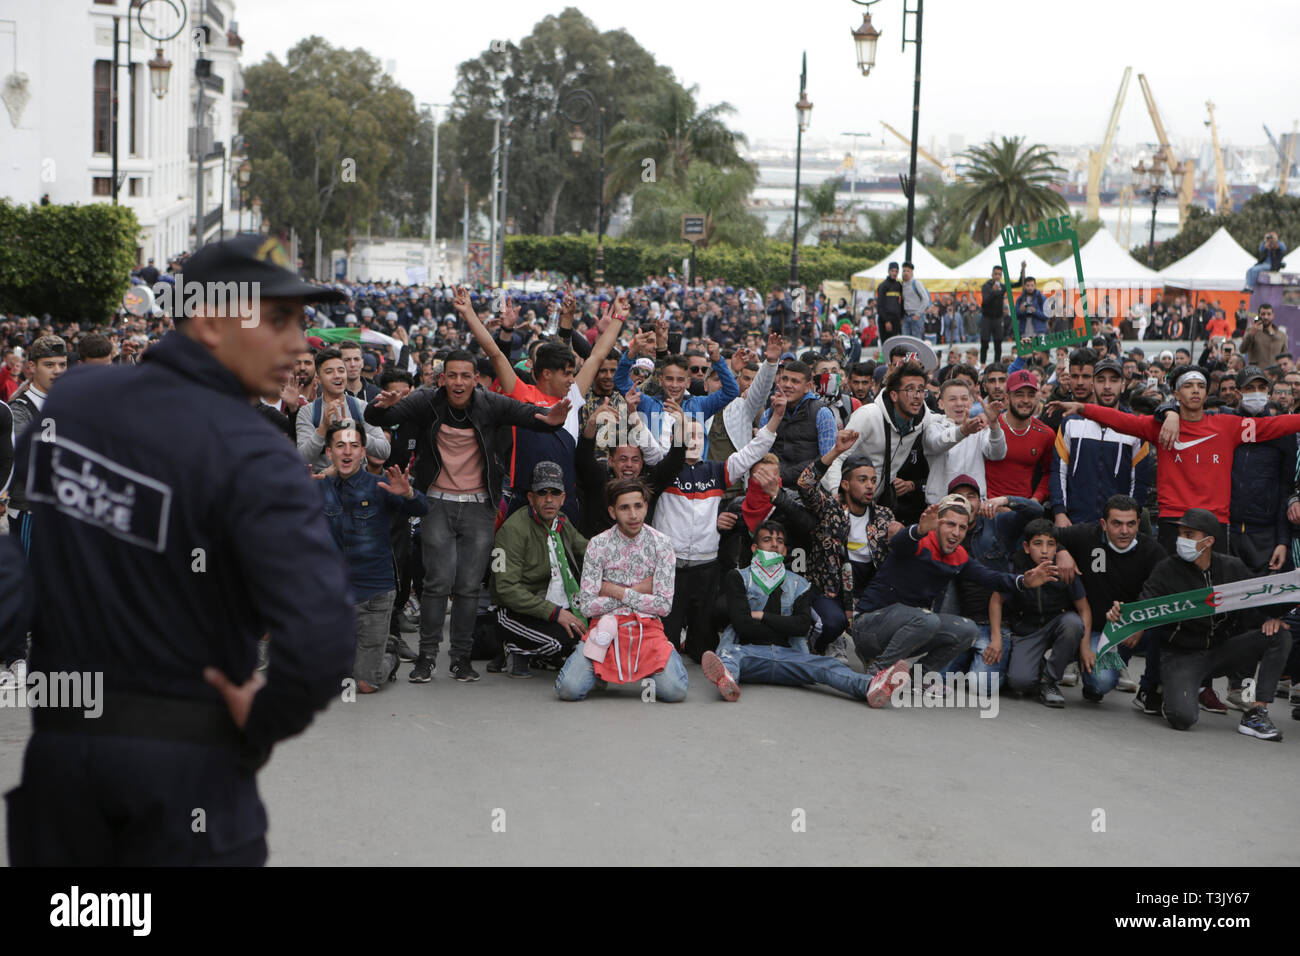 10 April 2019, Algeria, Algiers: Algerian protesters shout slogans in front of a security cordon during an anti-government demonstration. Algerians continued to demonstrate although newly appointed interim president Abdelkader Bensalah has set 04 July 2019 as the date for the country's presidential election. The Algerian parliament on Tuesday named Abdelkader Bensalah, who also concurrently serves as the President of the Algerian Council of the Nation, as the country's new interim president after long-serving leader Abdelaziz Bouteflika stepped down last week. Photo: Farouk Batiche/dpa Stock Photo